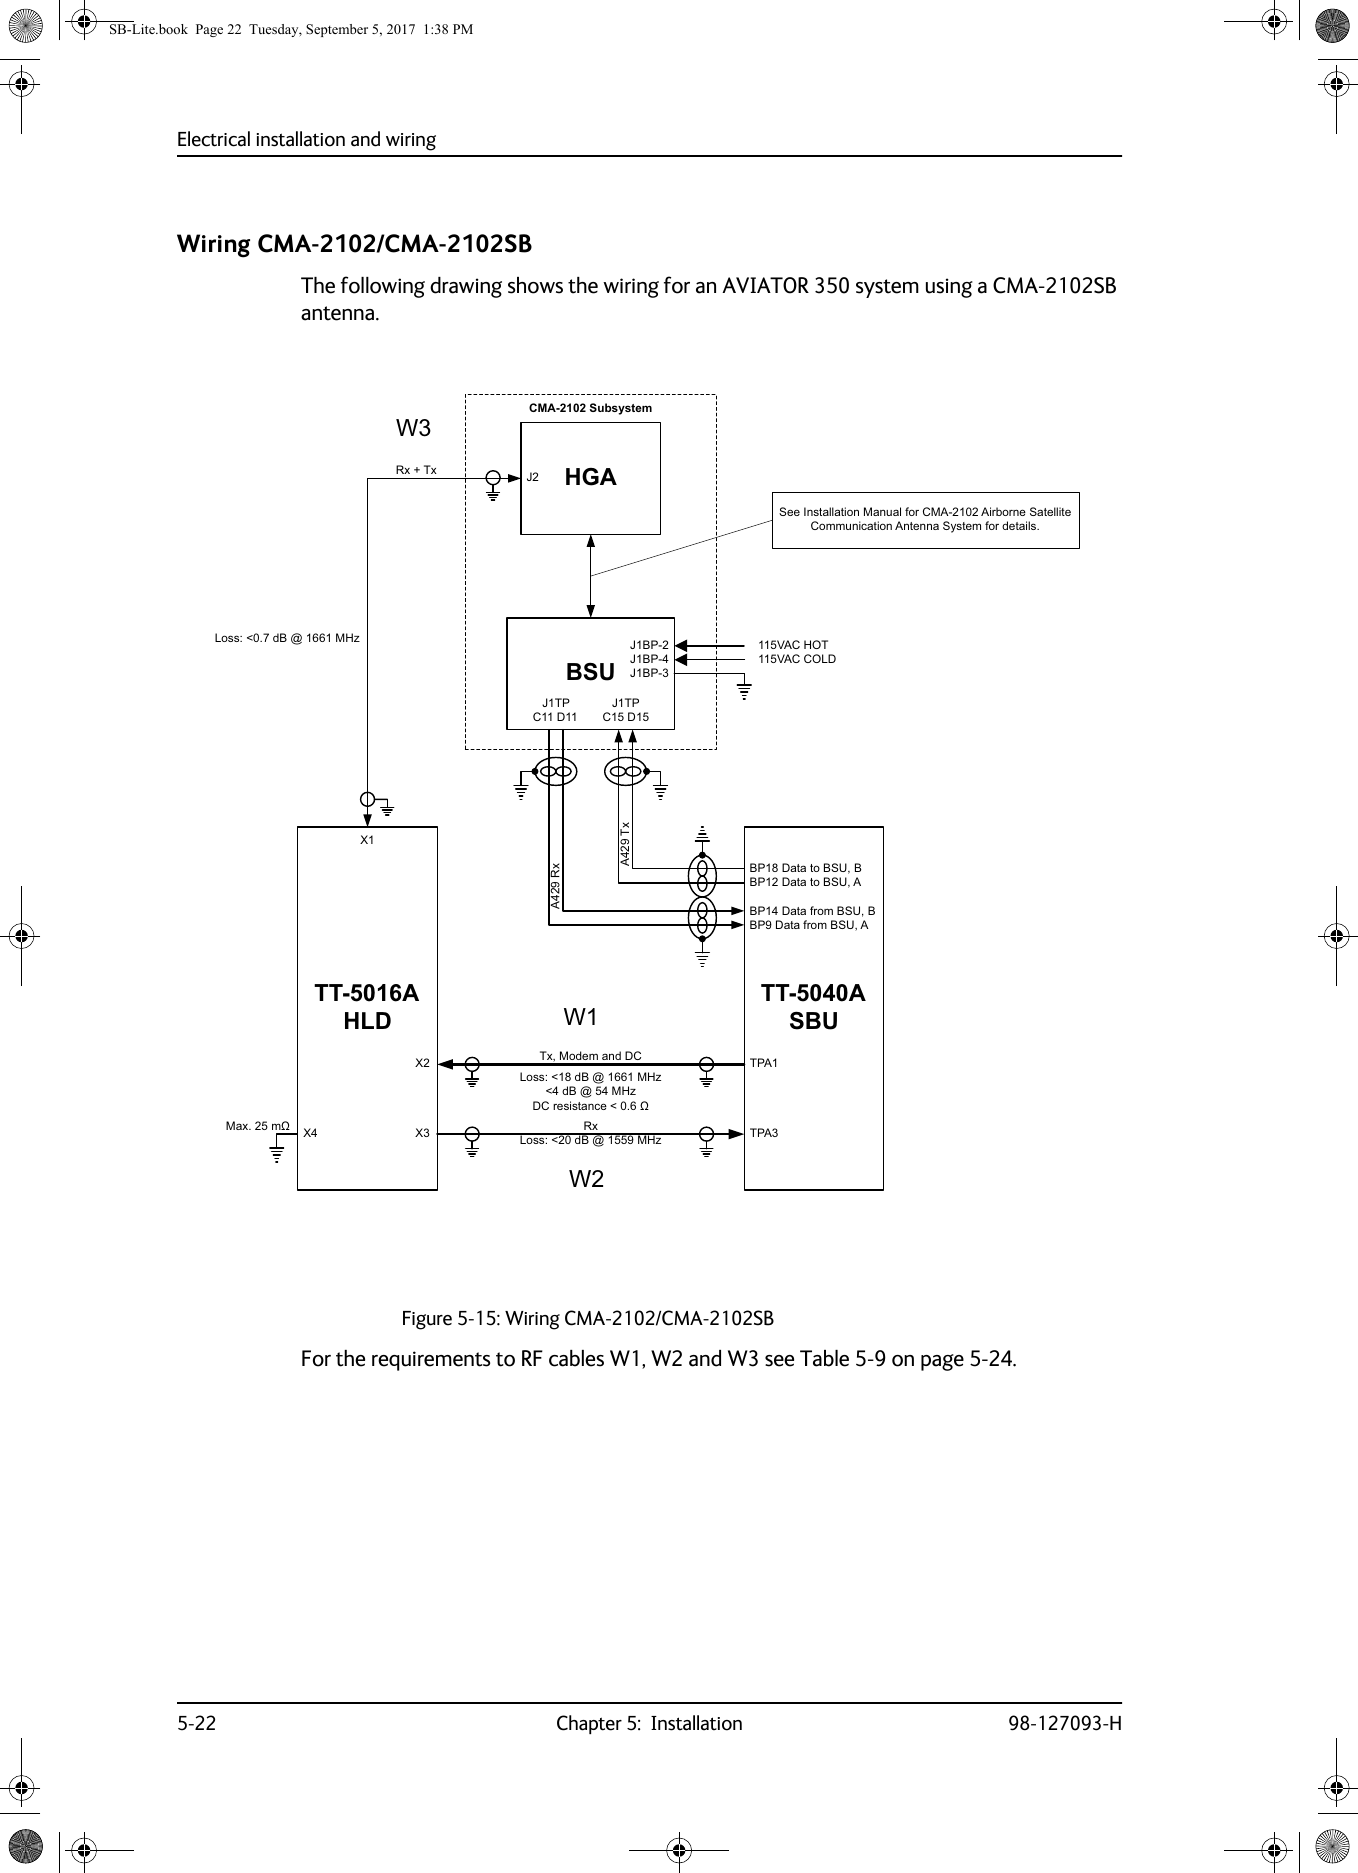 Electrical installation and wiring5-22 Chapter 5:  Installation 98-127093-HWiring CMA-2102/CMA-2102SBThe following drawing shows the wiring for an AVIATOR 350 system using a CMA-2102SB antenna.For the requirements to RF cables W1, W2 and W3 see Table  5-9 on page  5-24.Figure 5-15: Wiring CMA-2102/CMA-2102SB77$+/&apos;%68-73&amp;&apos;&amp;0$6XEV\VWHP+*$;77$6%8-73&amp;&apos;$7[$5[73$73$;;7[0RGHPDQG&apos;&amp;5[5[7[;0D[Pȍ/RVVG%#0+]/RVVG%#0+]/RVVG%#0+]G%#0+]&apos;&amp;UHVLVWDQFHȍ9$&amp;+279$&amp;&amp;2/&apos;-%3-%3-%3-6HH,QVWDOODWLRQ0DQXDOIRU&amp;0$$LUERUQH6DWHOOLWH&amp;RPPXQLFDWLRQ$QWHQQD6\VWHPIRUGHWDLOV:::%3&apos;DWDWR%68%%3&apos;DWDWR%68$%3&apos;DWDIURP%68%%3&apos;DWDIURP%68$SB-Lite.book  Page 22  Tuesday, September 5, 2017  1:38 PM